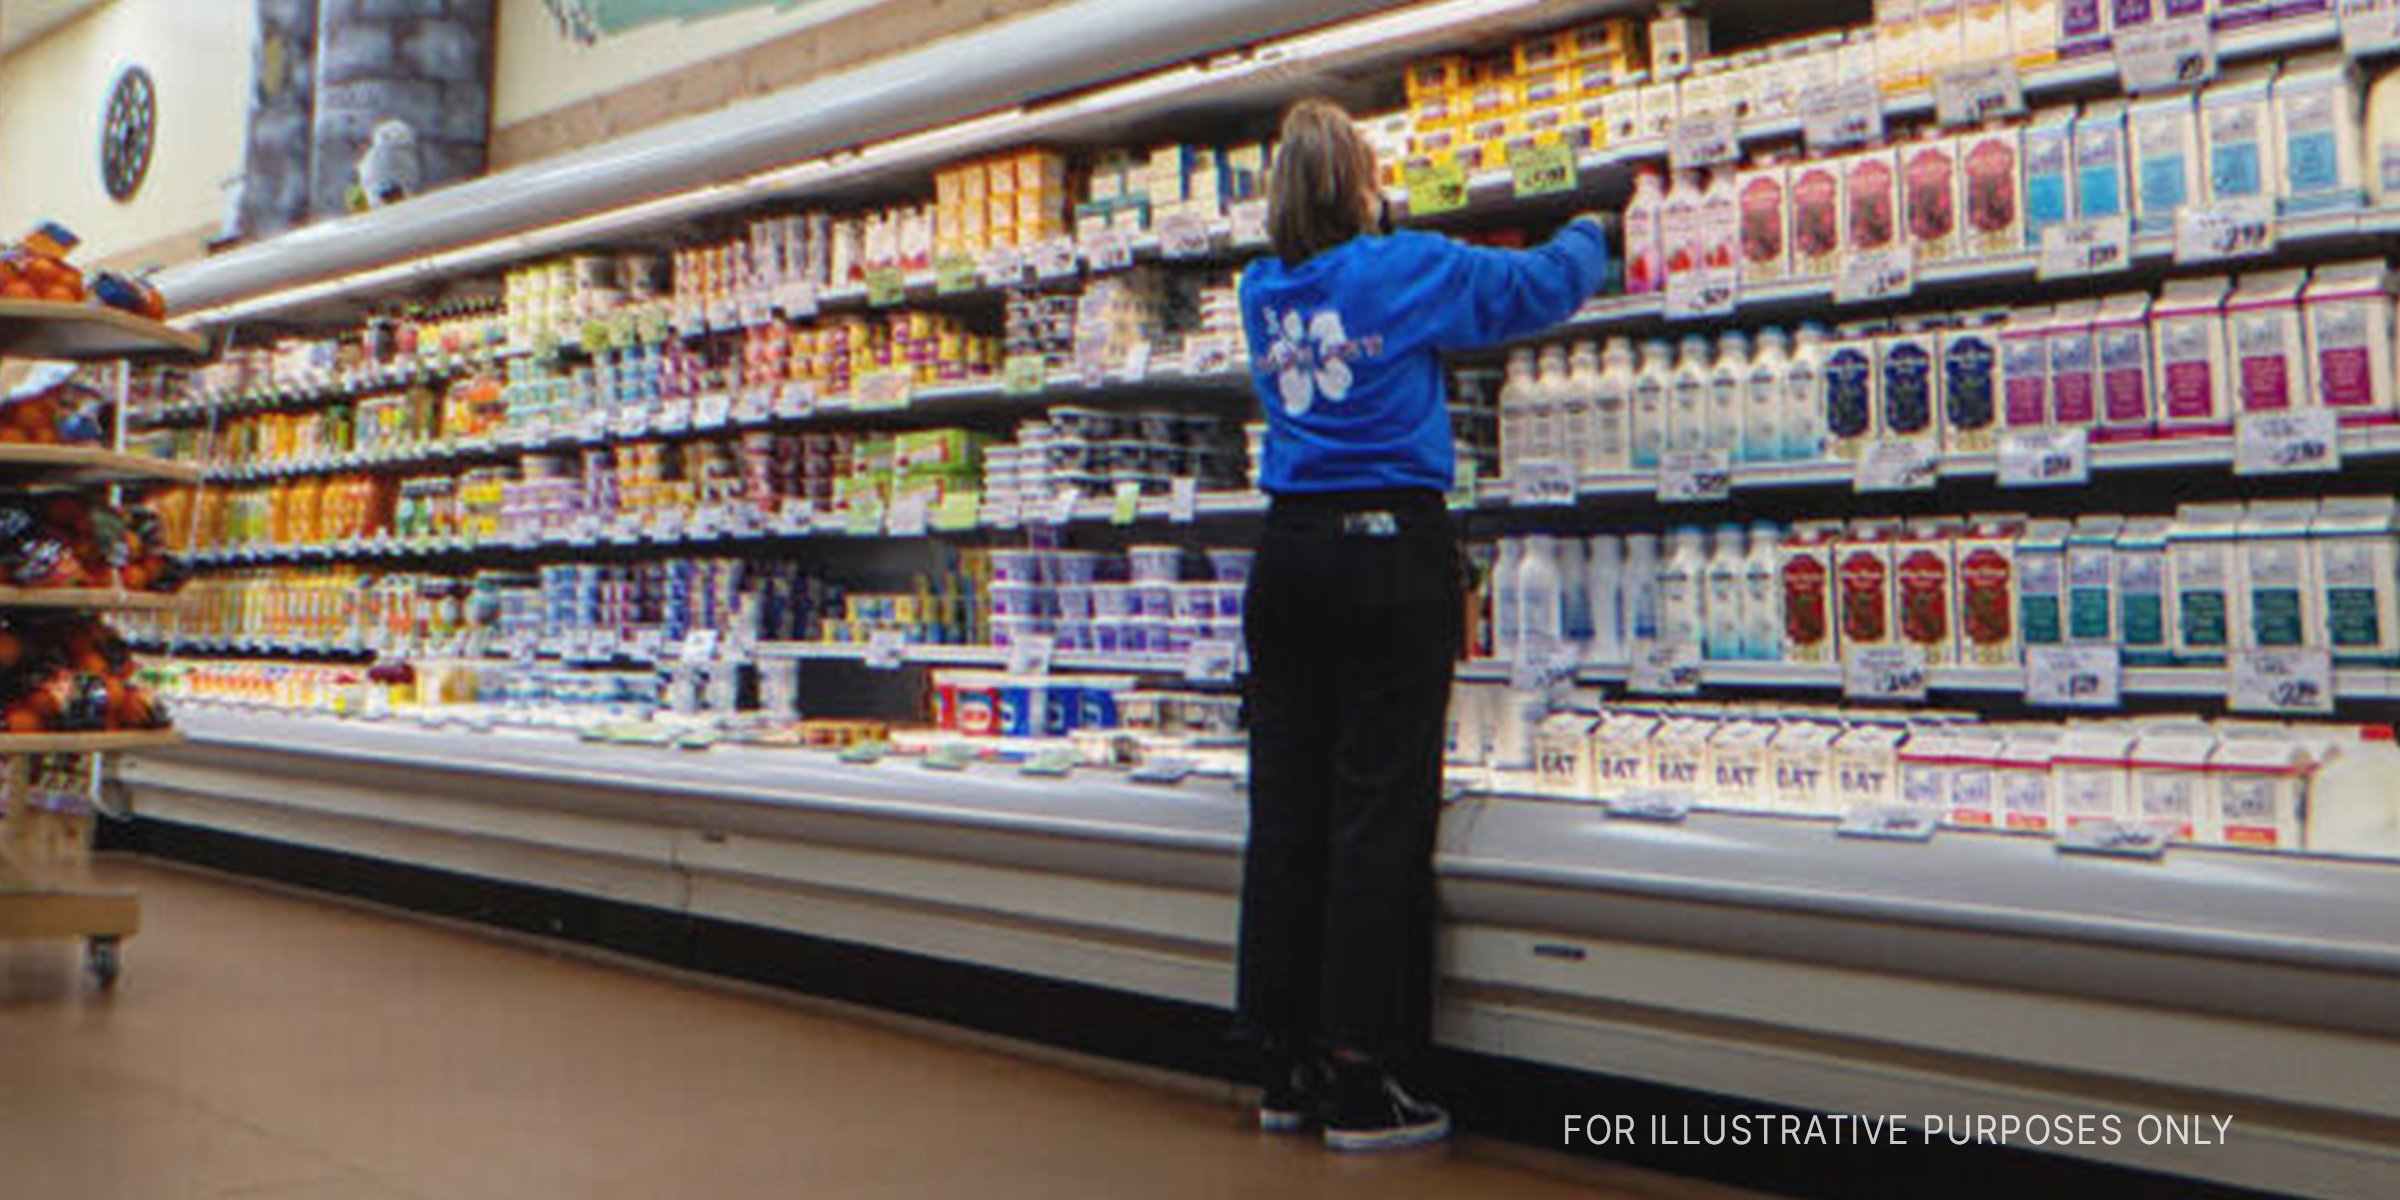 Woman Working At A Grocery Store. | Source: Shutterstock